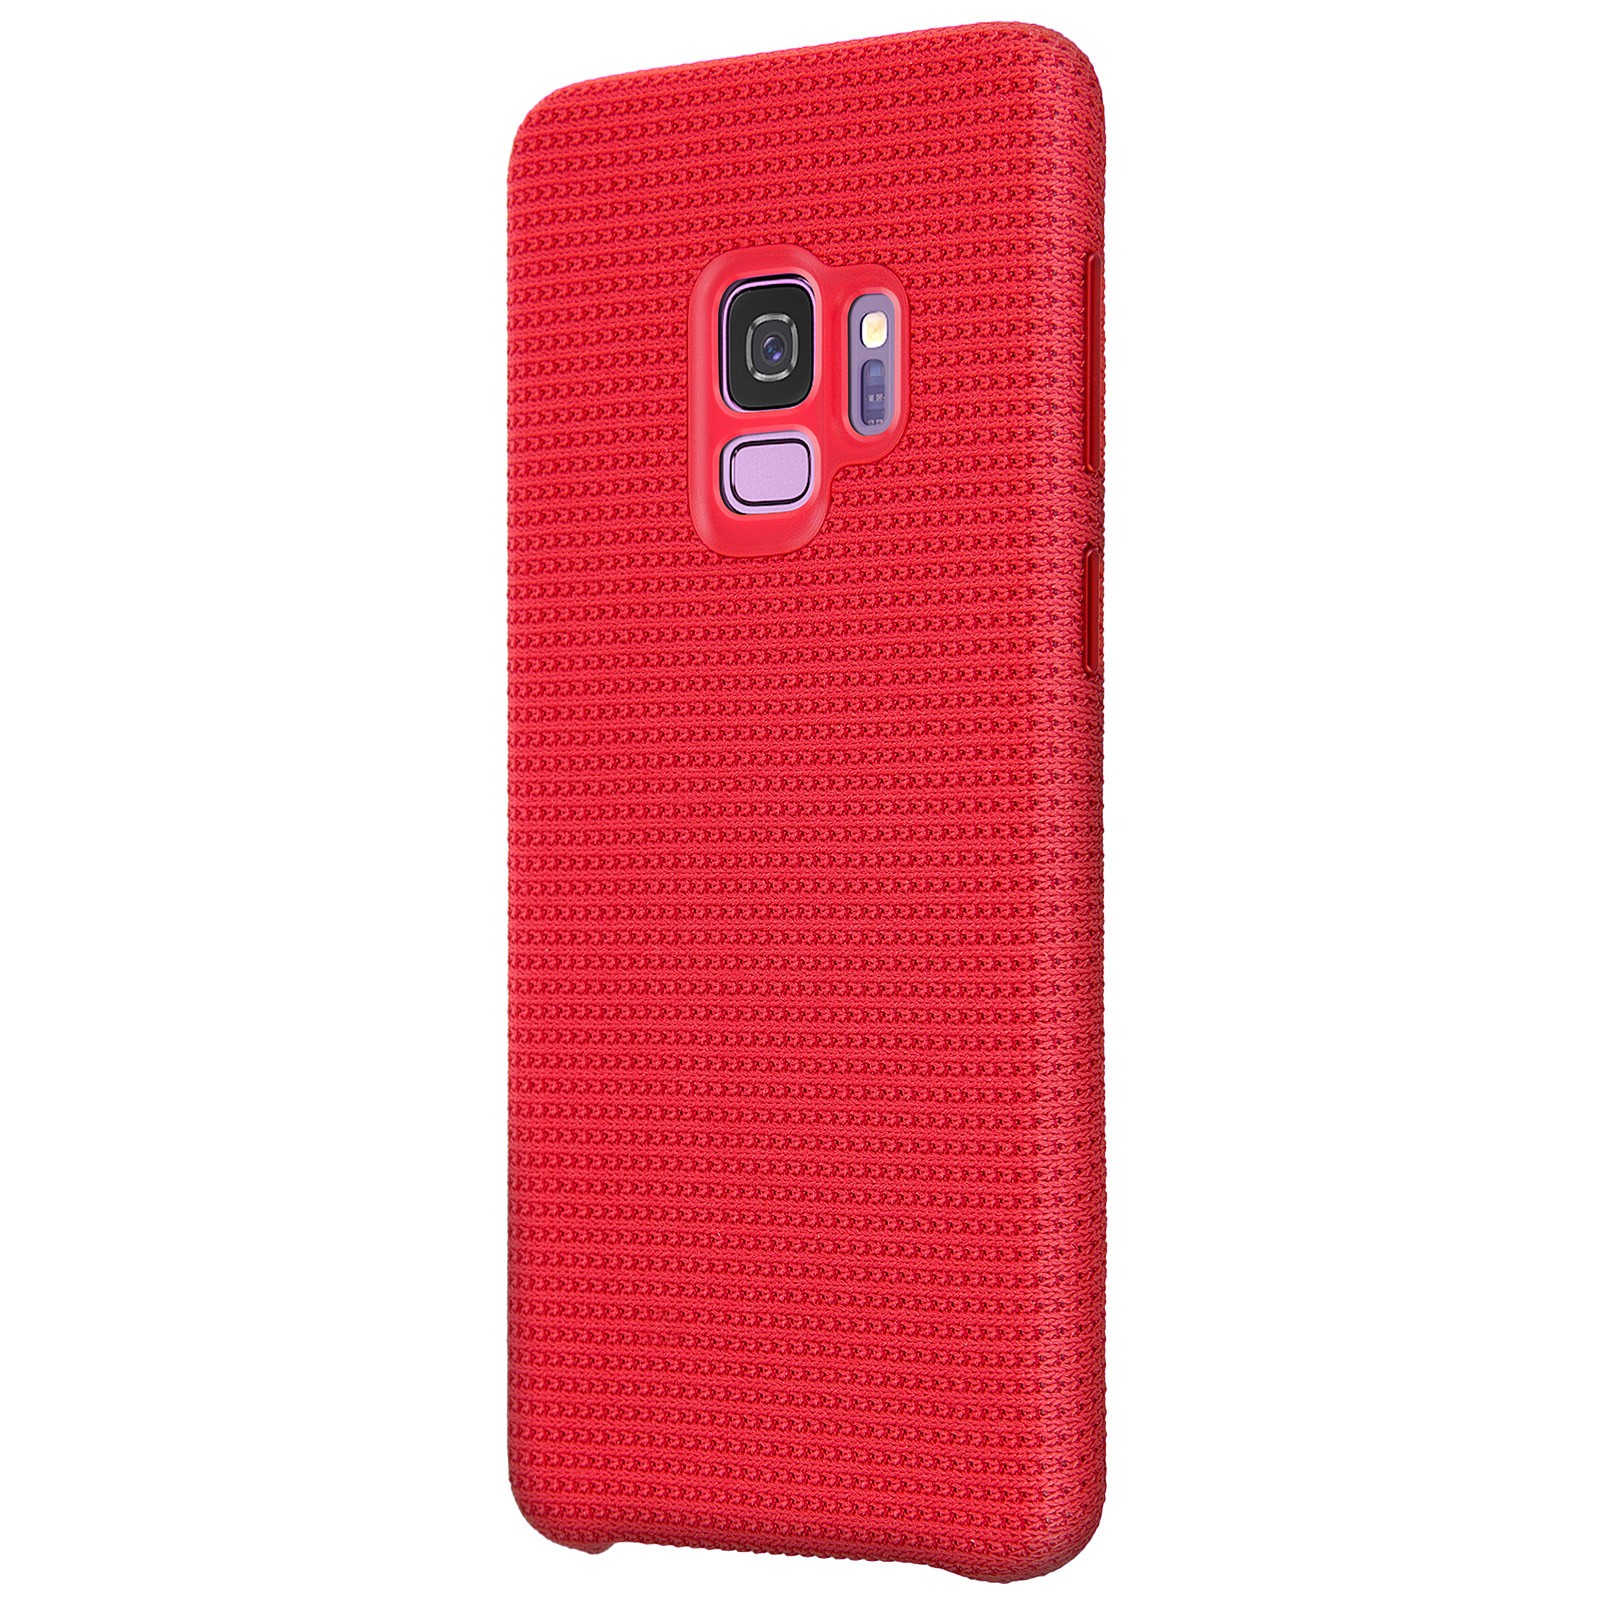 Hyperknit Case - Cover SAMSUNG Galaxy (Red), Galaxy for Samsung, Bookcover, Keine S9, Angabe S9